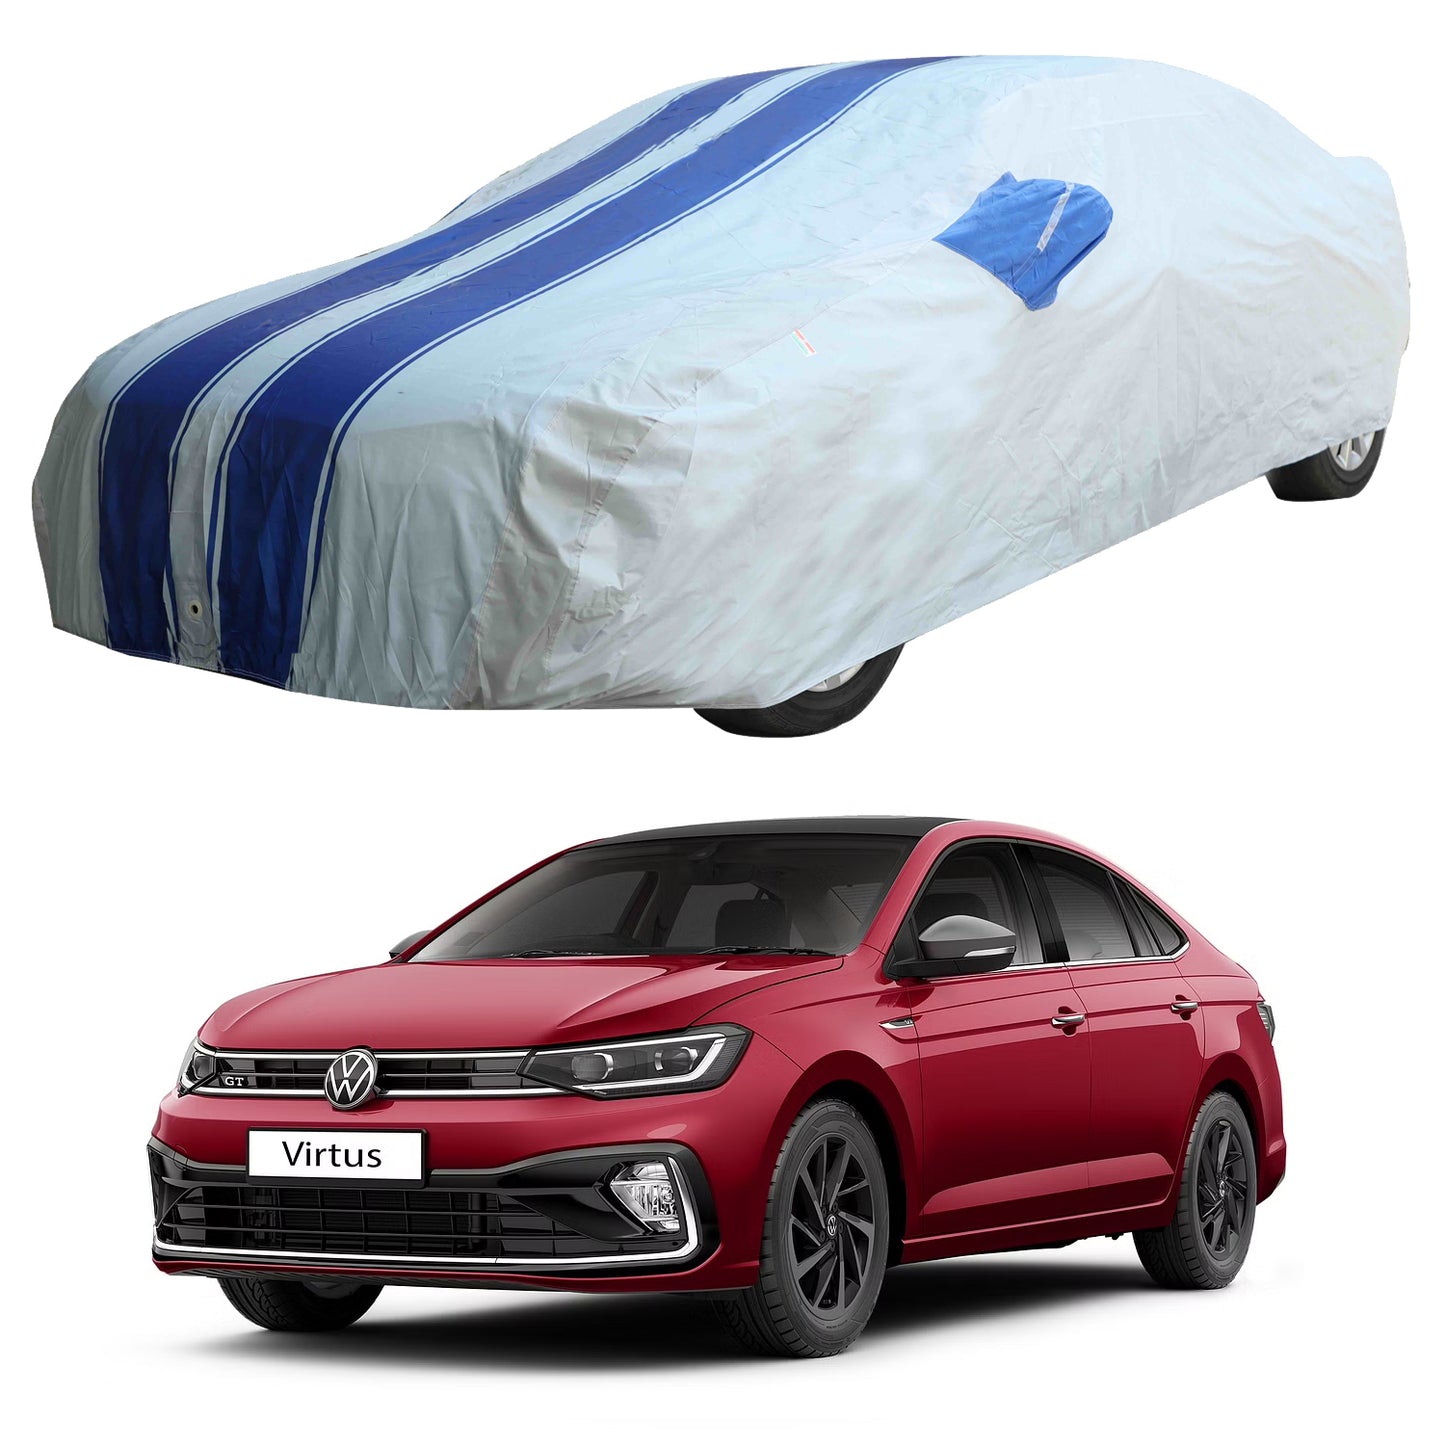 Oshotto 100% Blue dustproof and Water Resistant Car Body Cover with Mirror Pockets For Volkswagen Virtus